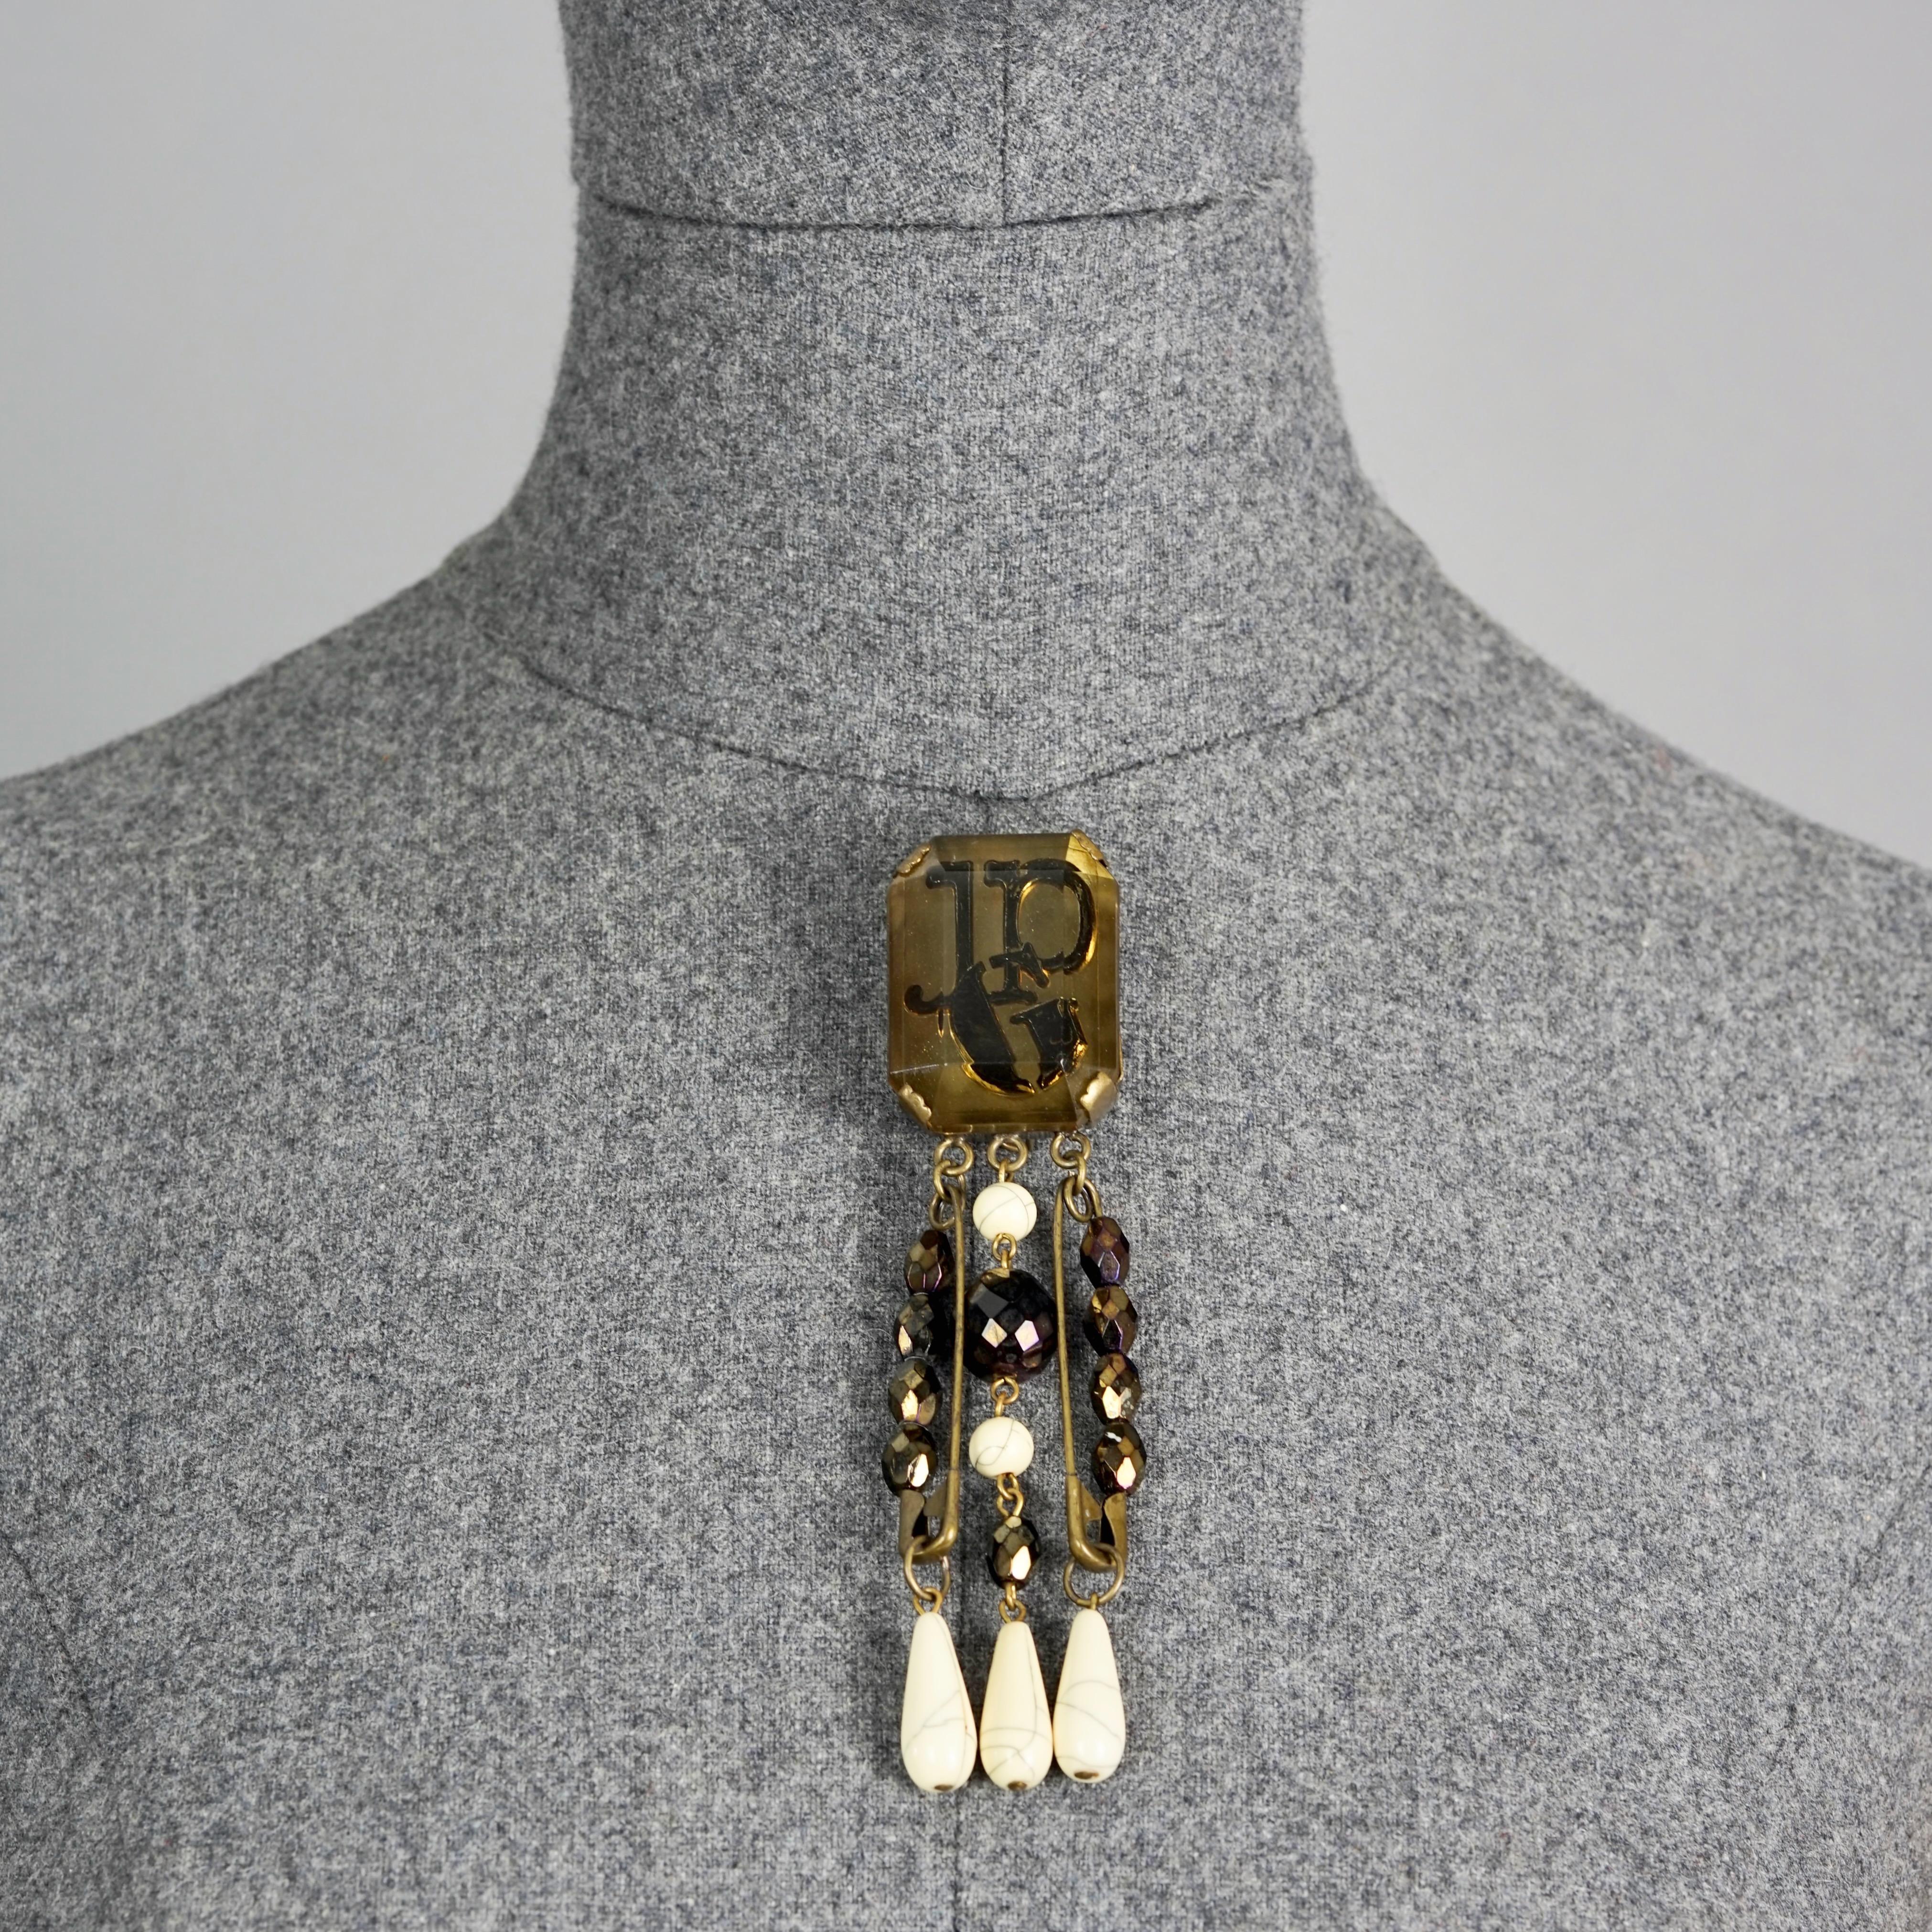 Vintage JEAN PAUL GAULTIER Logo Safety Pin Lucite Beaded Brooch

Measurements:
Height: 5.03 inches (12.8 cm)
Width: 1.14 inches (2.9 cm)

Features:
- 100% Authentic JEAN PAUL GAULTIER.
- Faceted lucite rectangular brooch with JGP logo and beaded